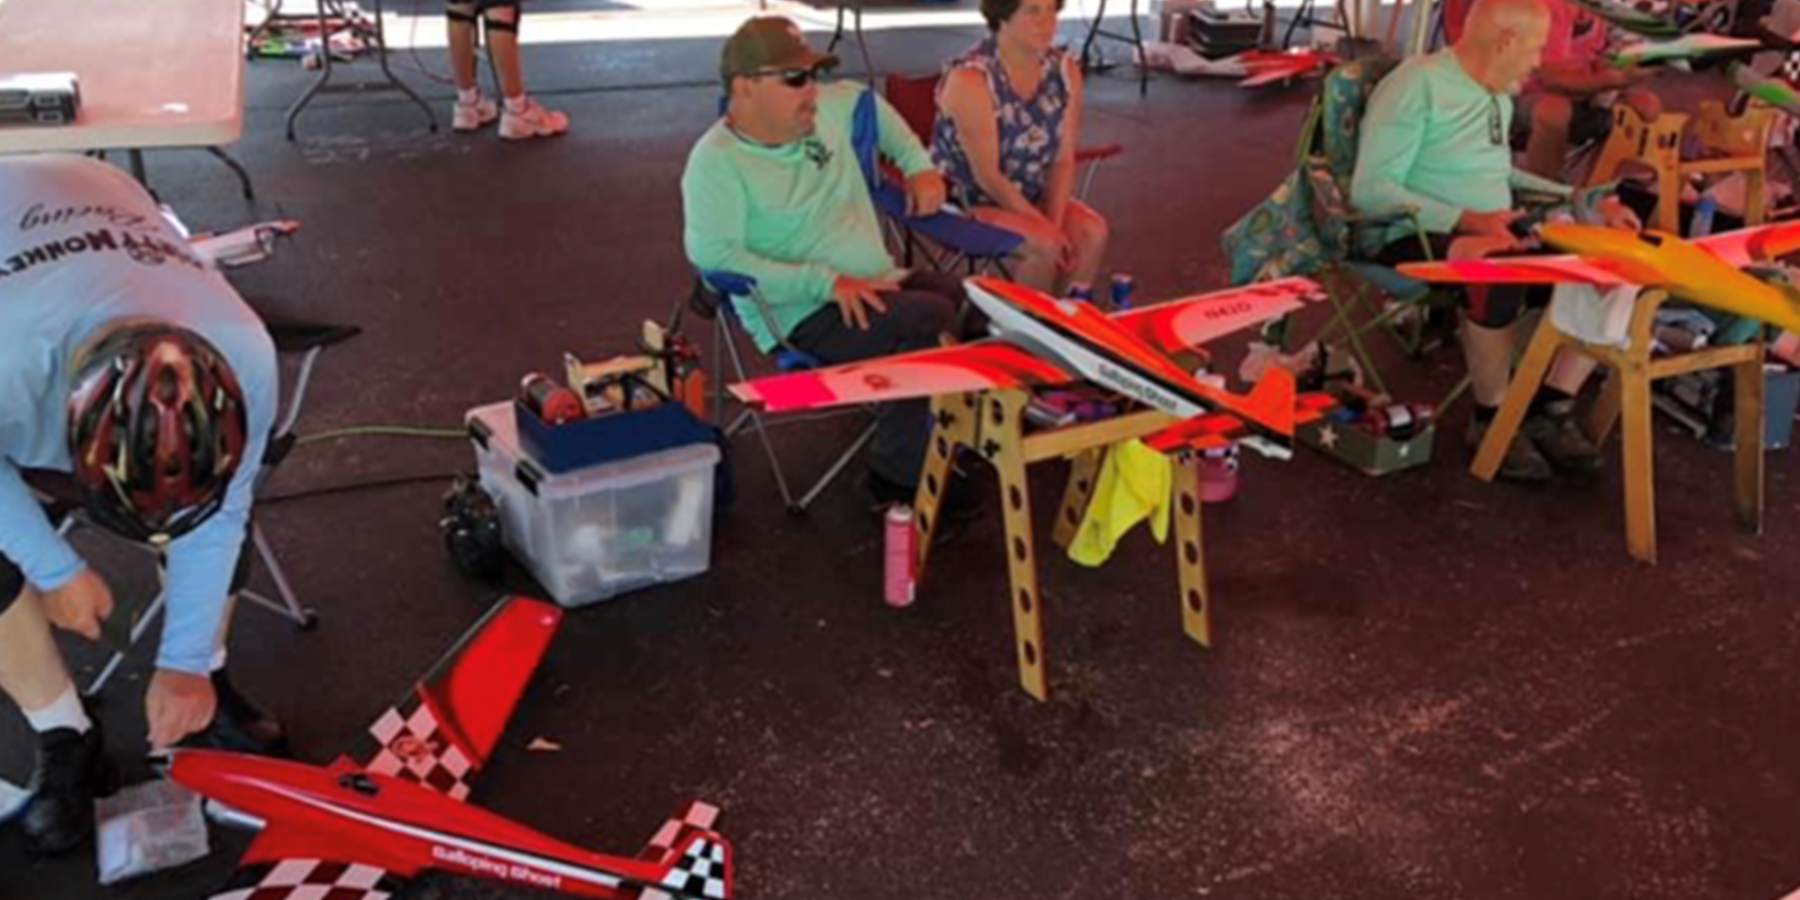 The Dirty Monkey racing team flew their Galloping Ghost models. Scott Hartman (left; red, black, and white model) is flying grea